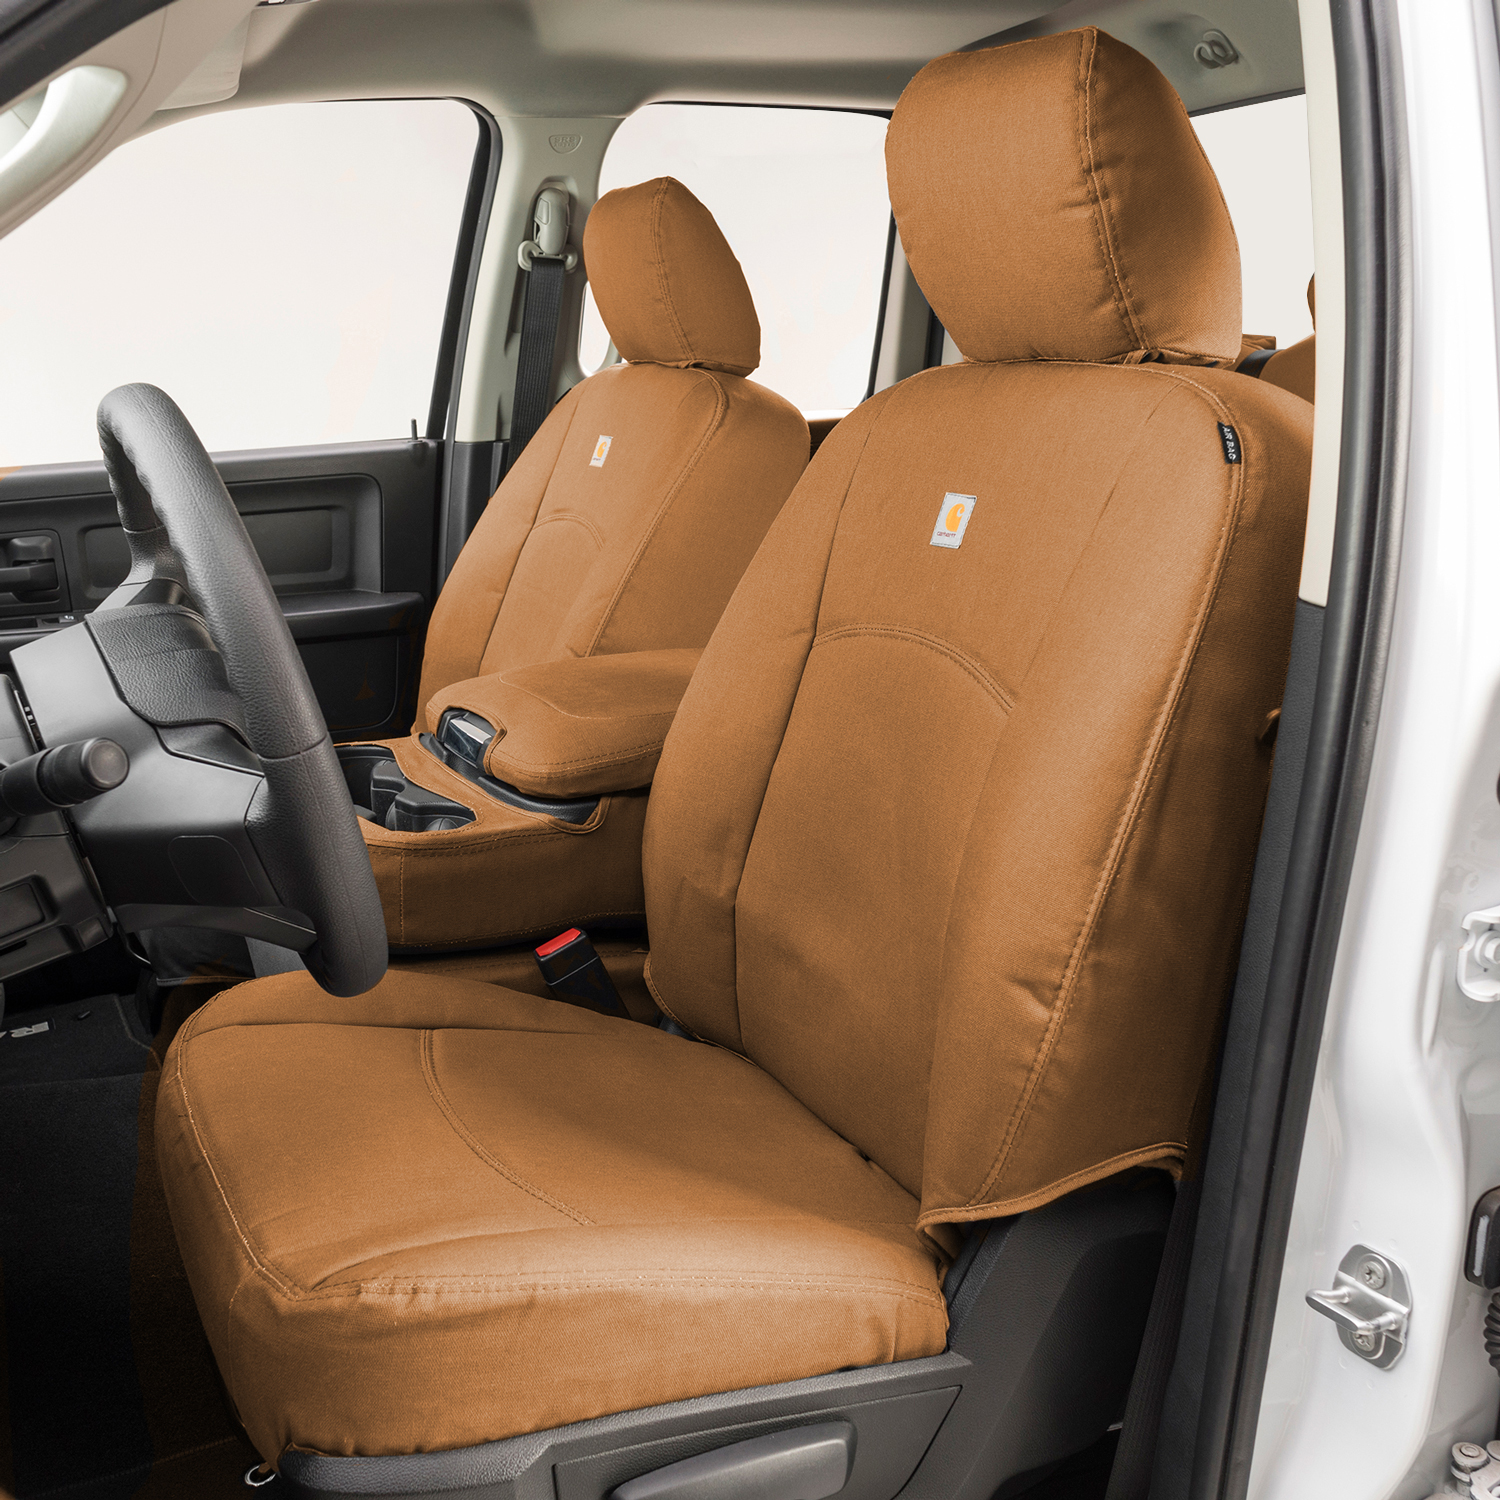 The ultimate Carhartt&reg; Seat Covers that combine the rugged protection and style you expect from Carhartt&reg; with an ultra-comfortable foam-backing to make any drive better.  When it comes to protecting your vehicle's seats from the damaging effects of water, mud, grease, oil, food, and dirt, Carhartt&reg; fabric is the protection you'll love. Tough as nails, these covers are finely crafted and sewn from the firm-hand Carhartt&reg; duck weave fabric and double stitched at the main seams.